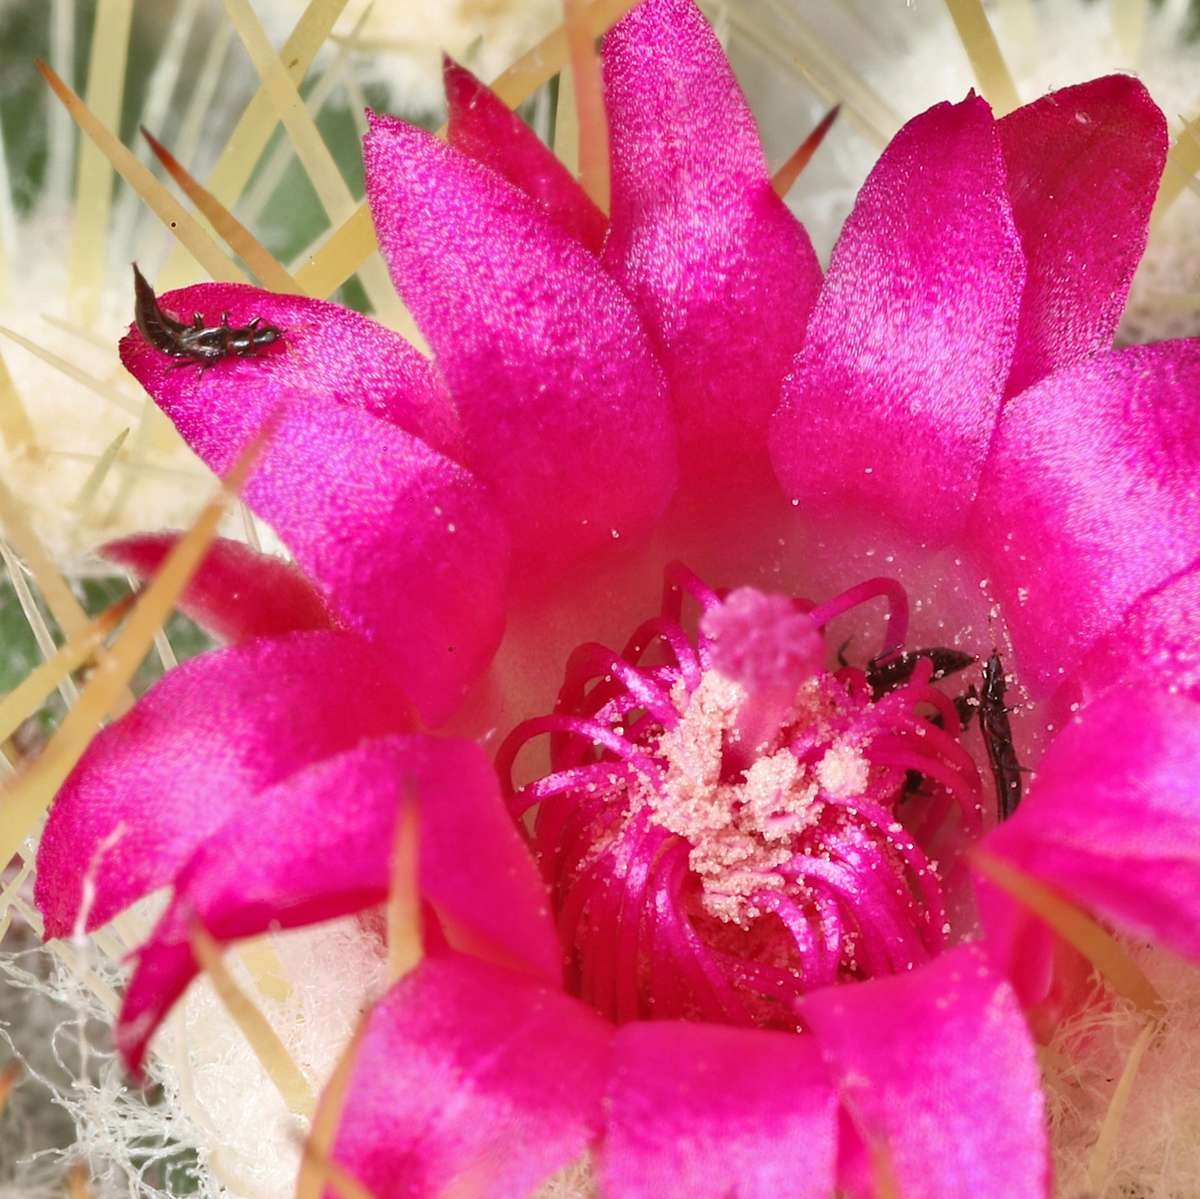 Thrips on cactus flower